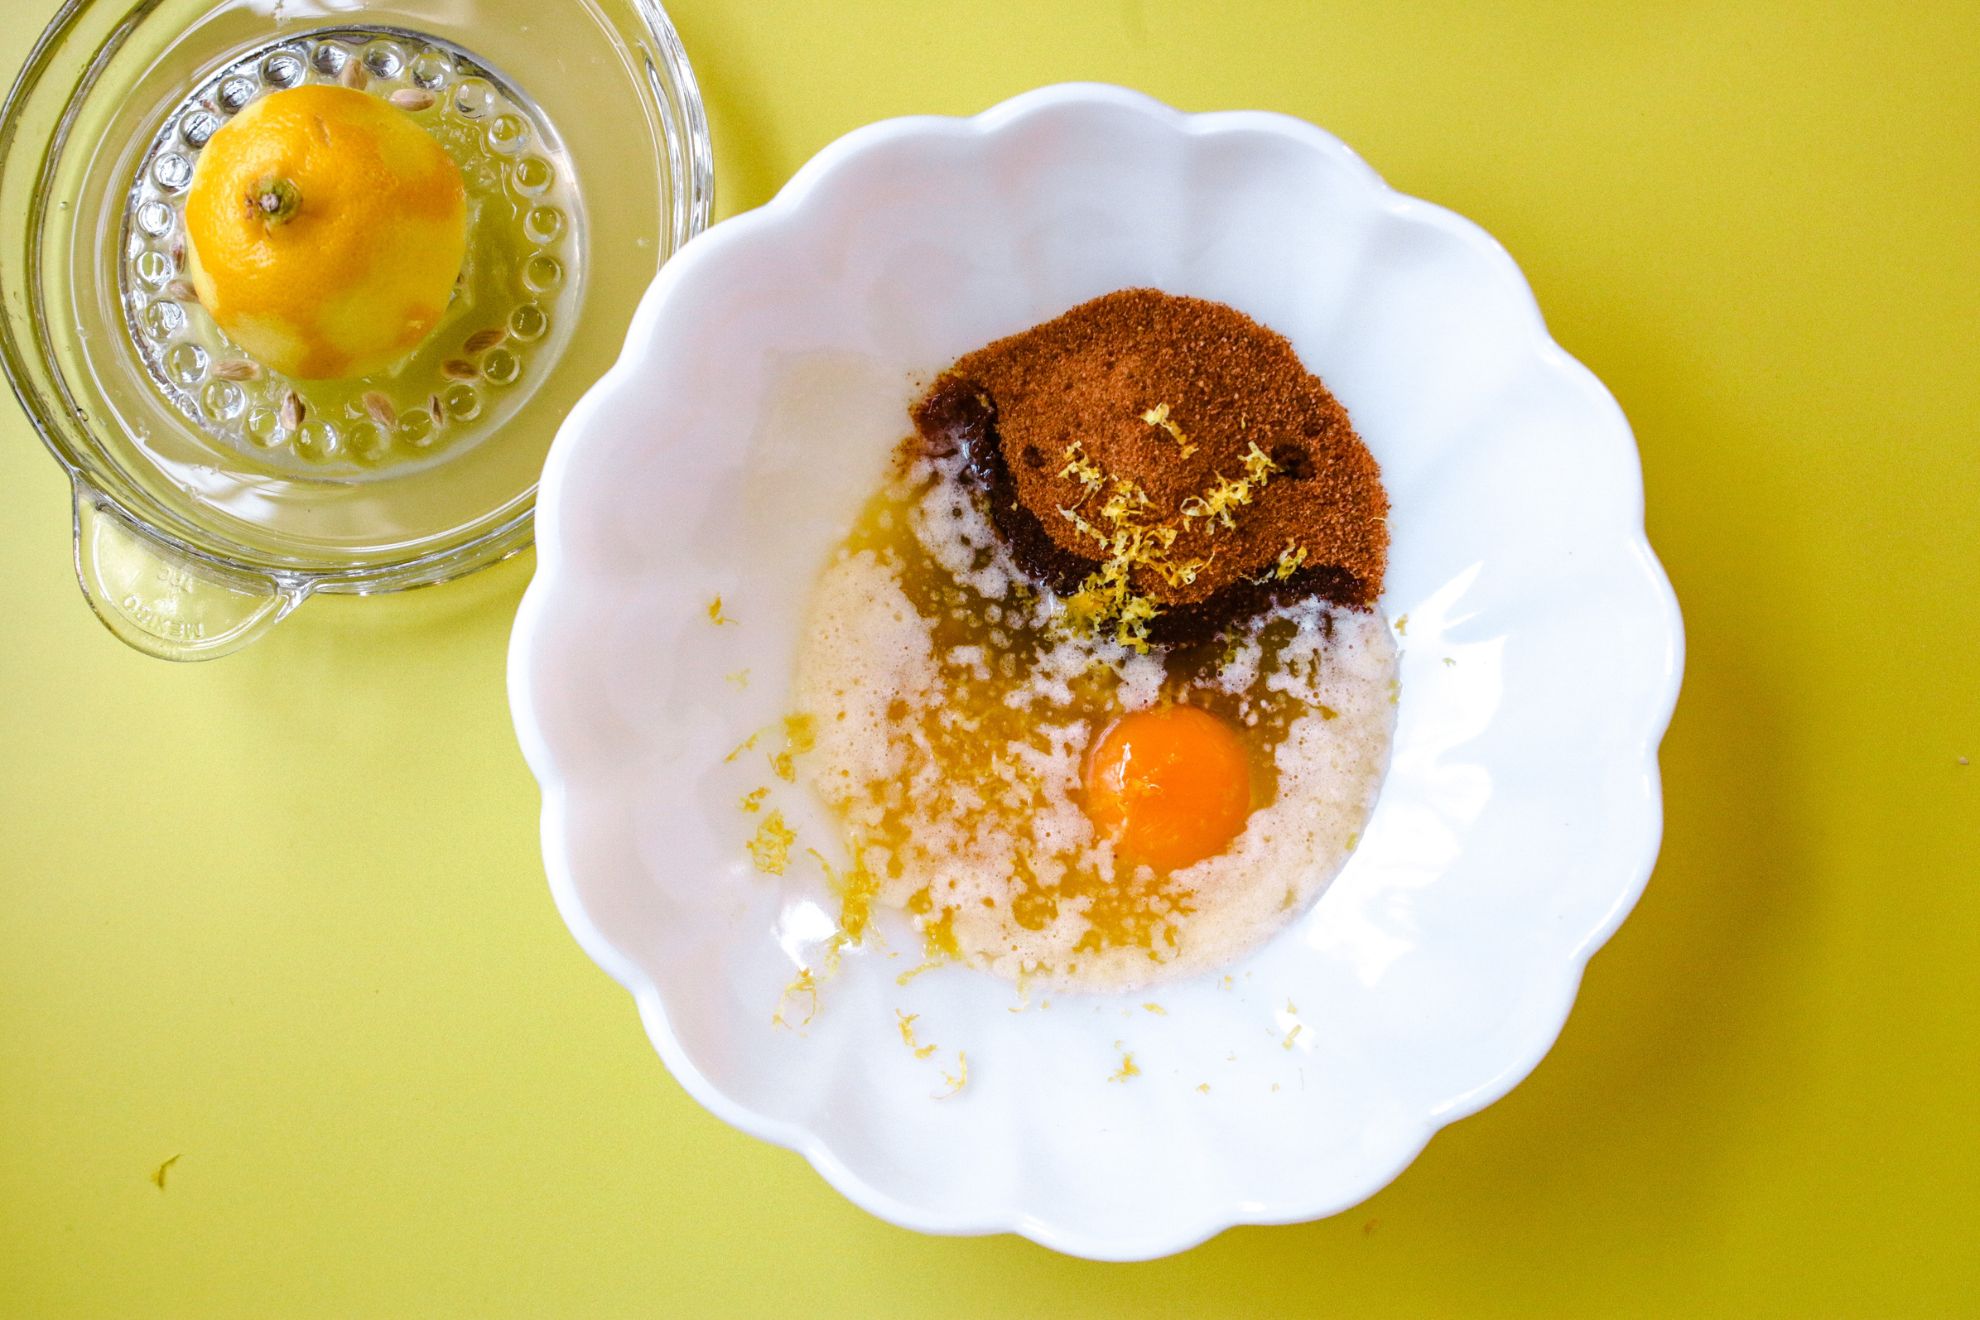 This is an overhead horizontal image of a white scalloped bowl with ingredients in it like coconut sugar, lemon zest, butter, and an egg. The bowl sits on a yellow surface with a glass juicer to the top left corner. The juicer has half of a lemon on it.